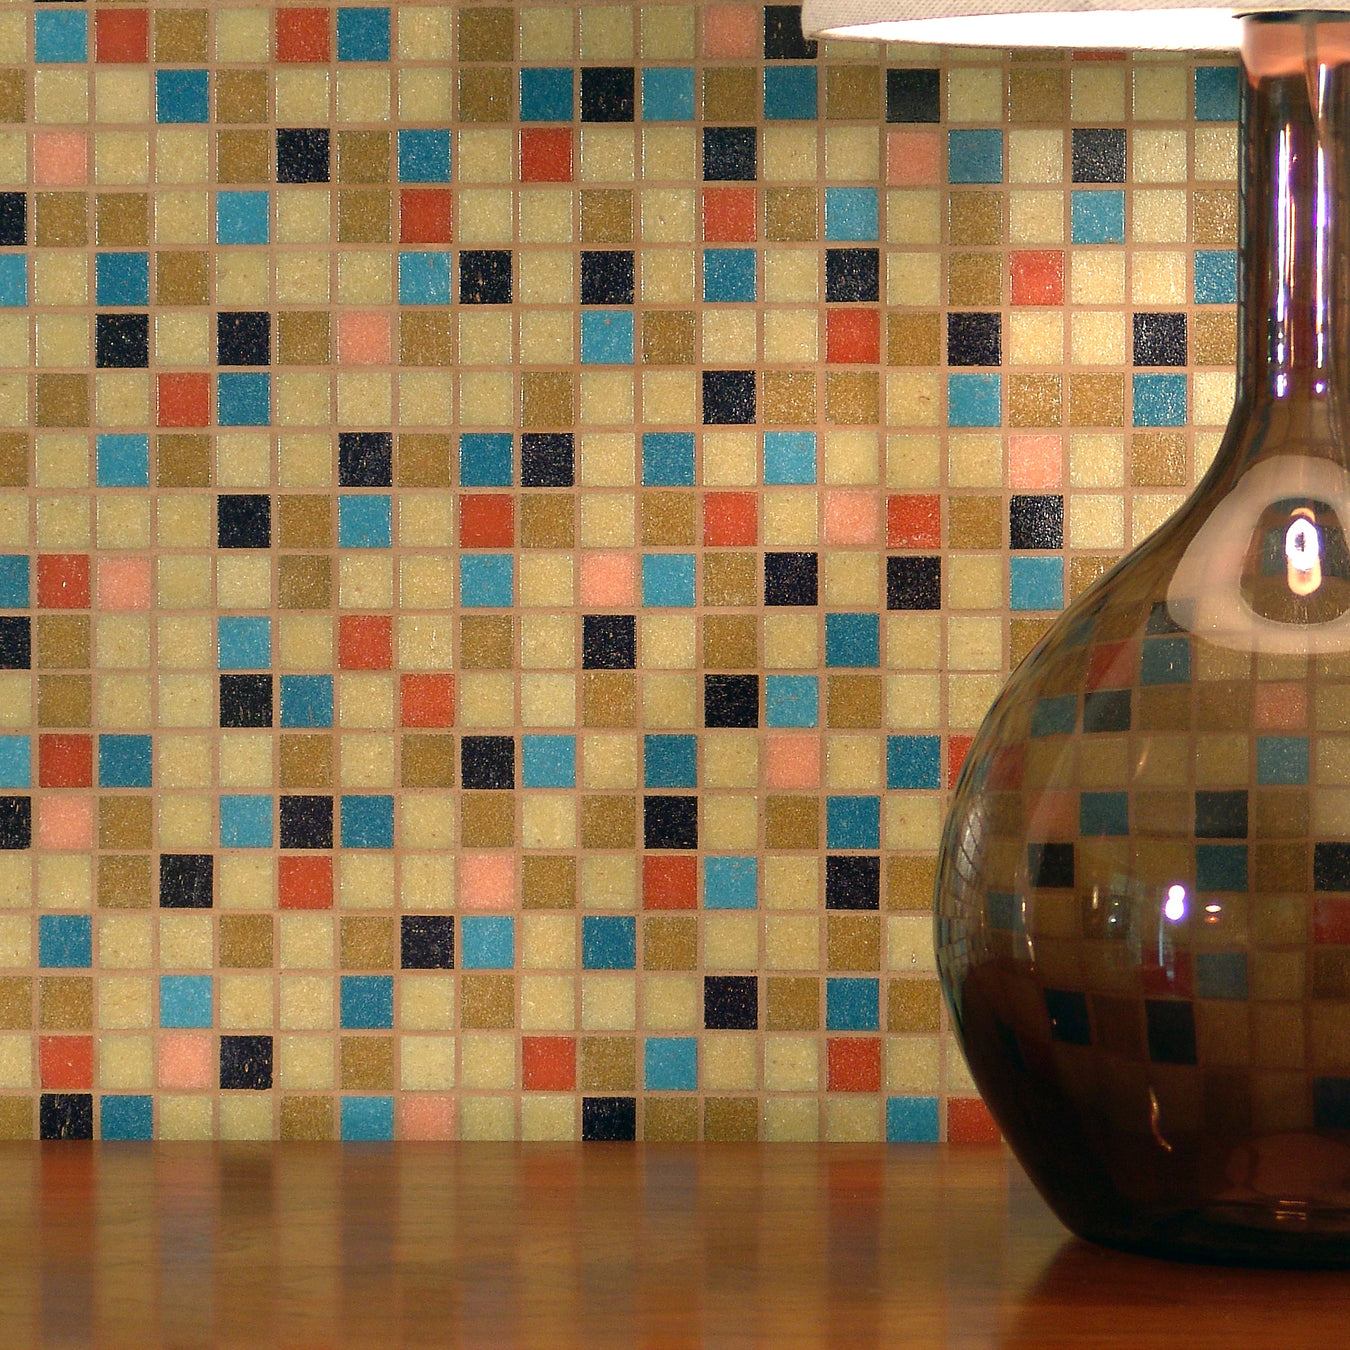 Modwalls Brio Glass Mosaic Tile | Custom Blend | Colorful Modern & Midcentury glass tile for kitchens, bathrooms, backsplashes, showers, floors, pools & outdoors. Create your own custom tile blend using our 36 color palette inspired by midcentury modern and retro design.